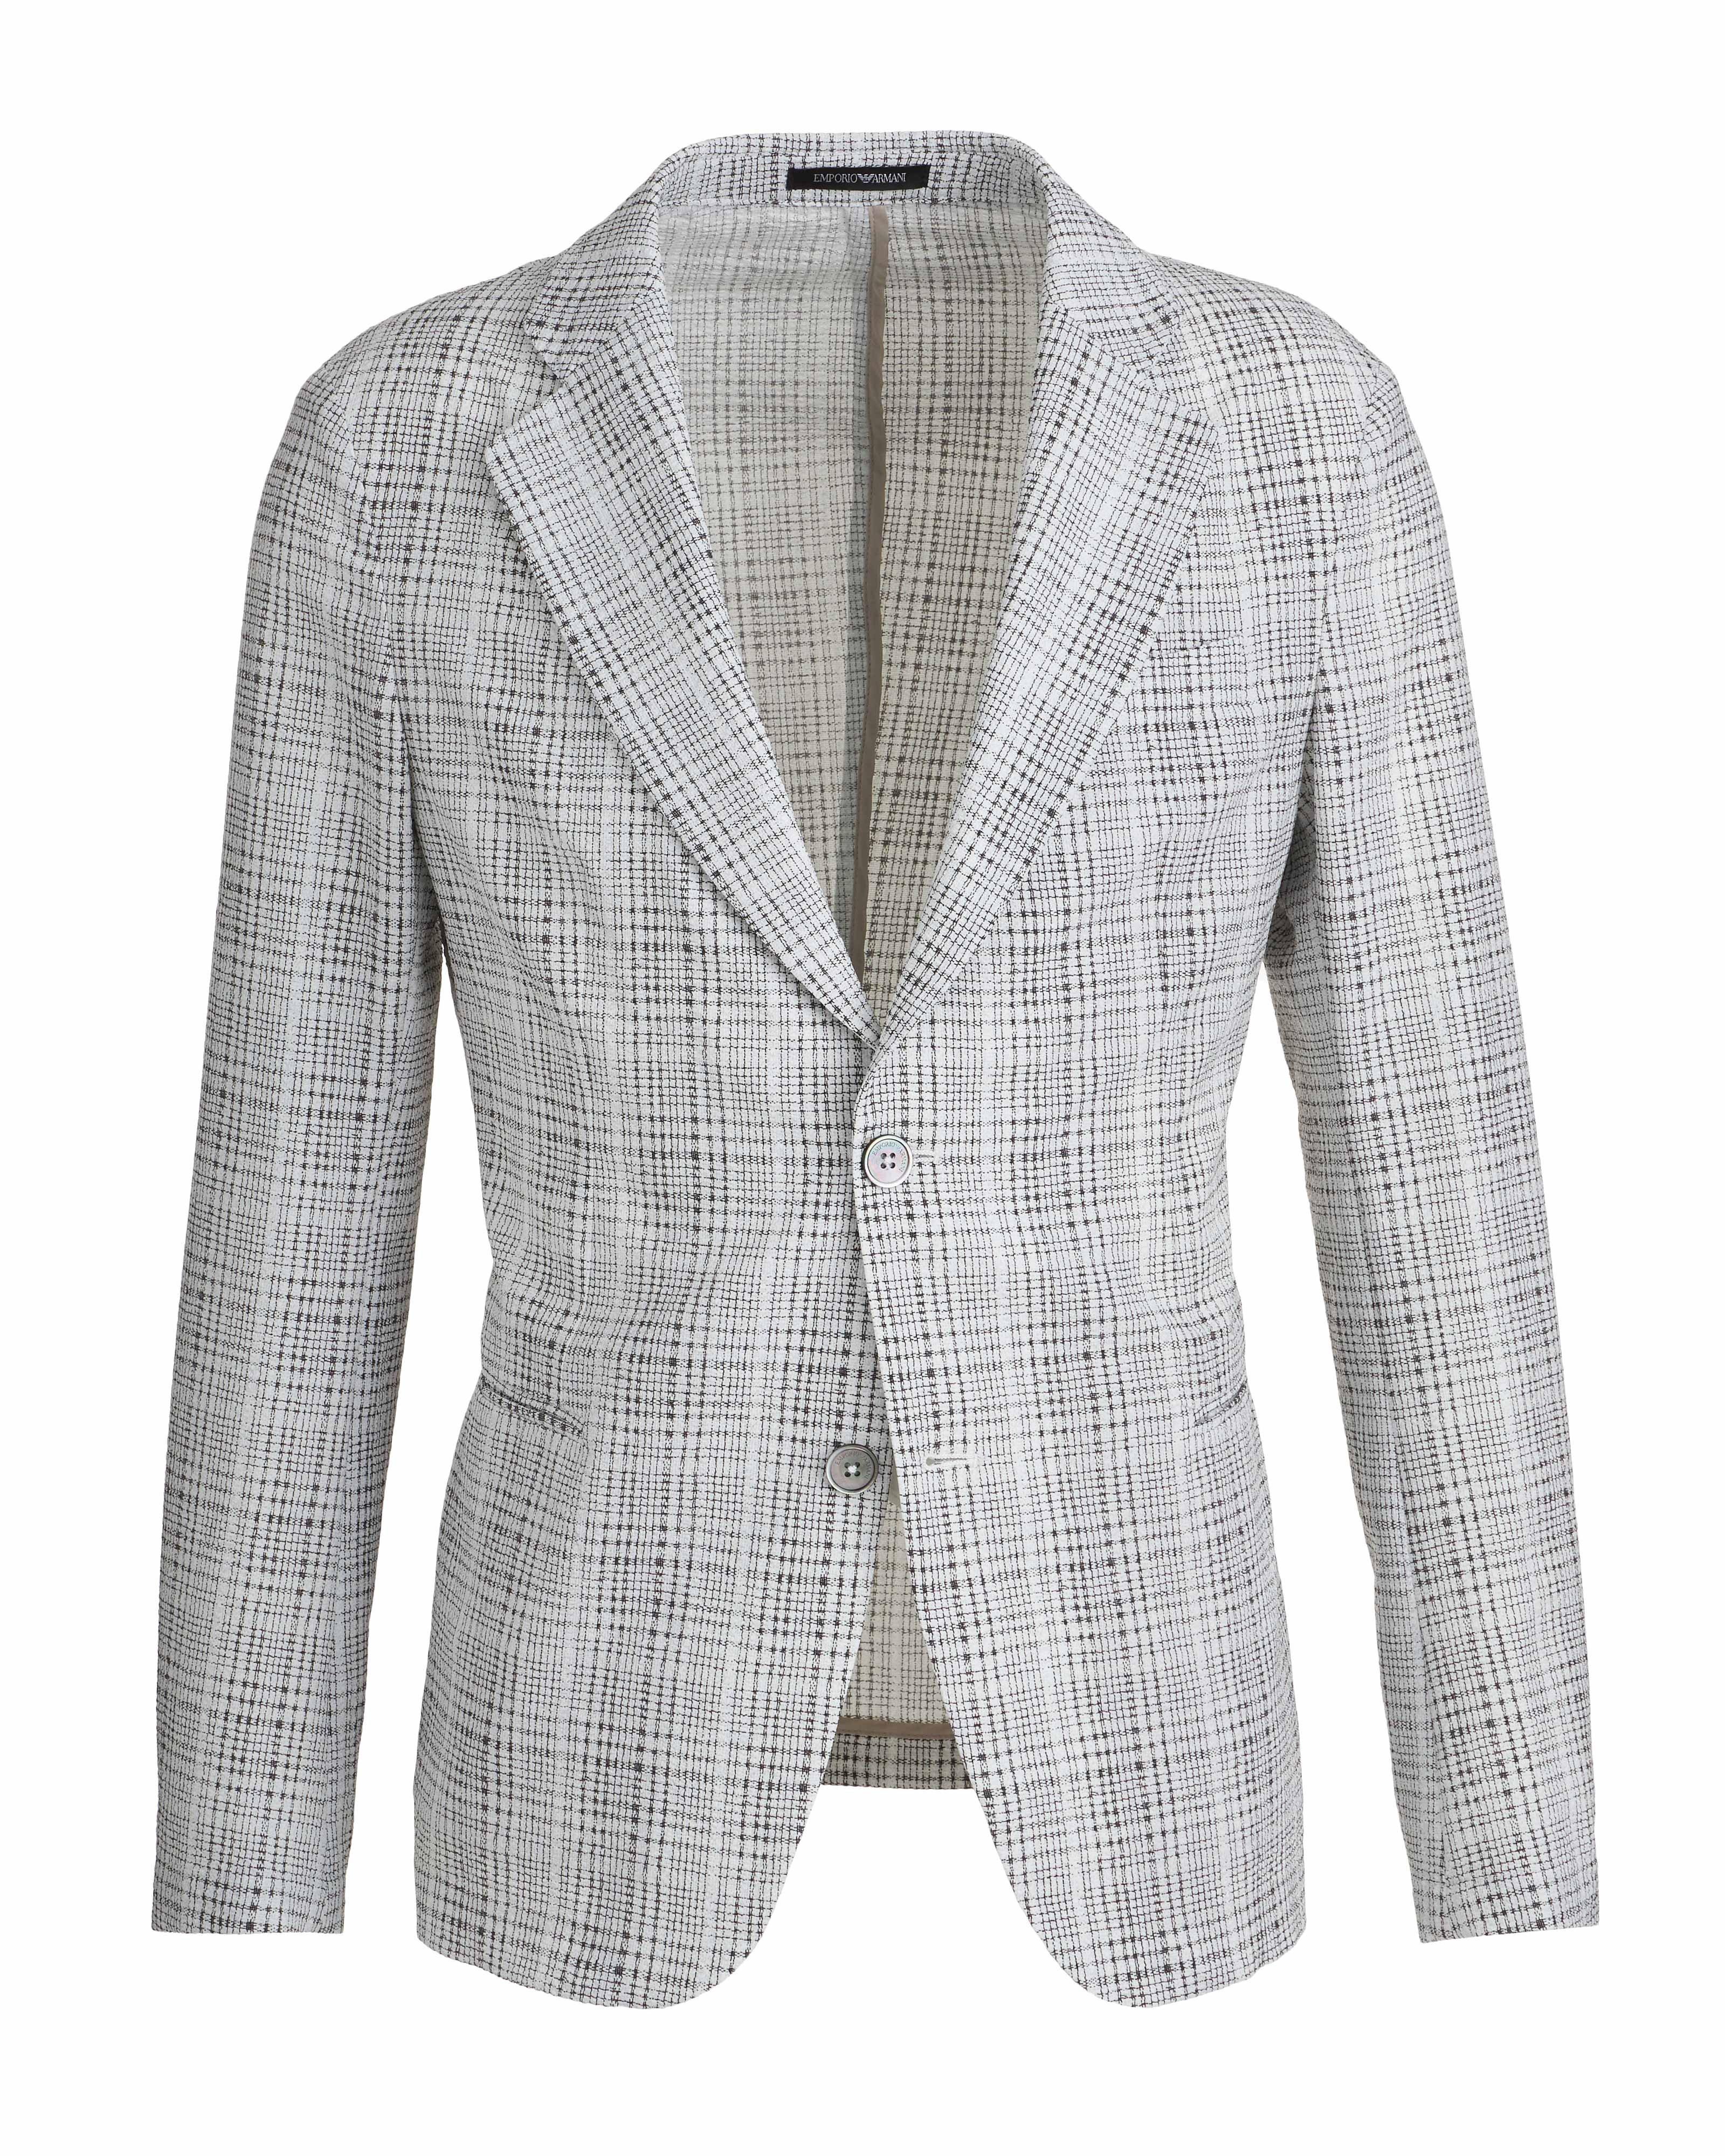 Unstructured Stretch Sports Jacket image 0